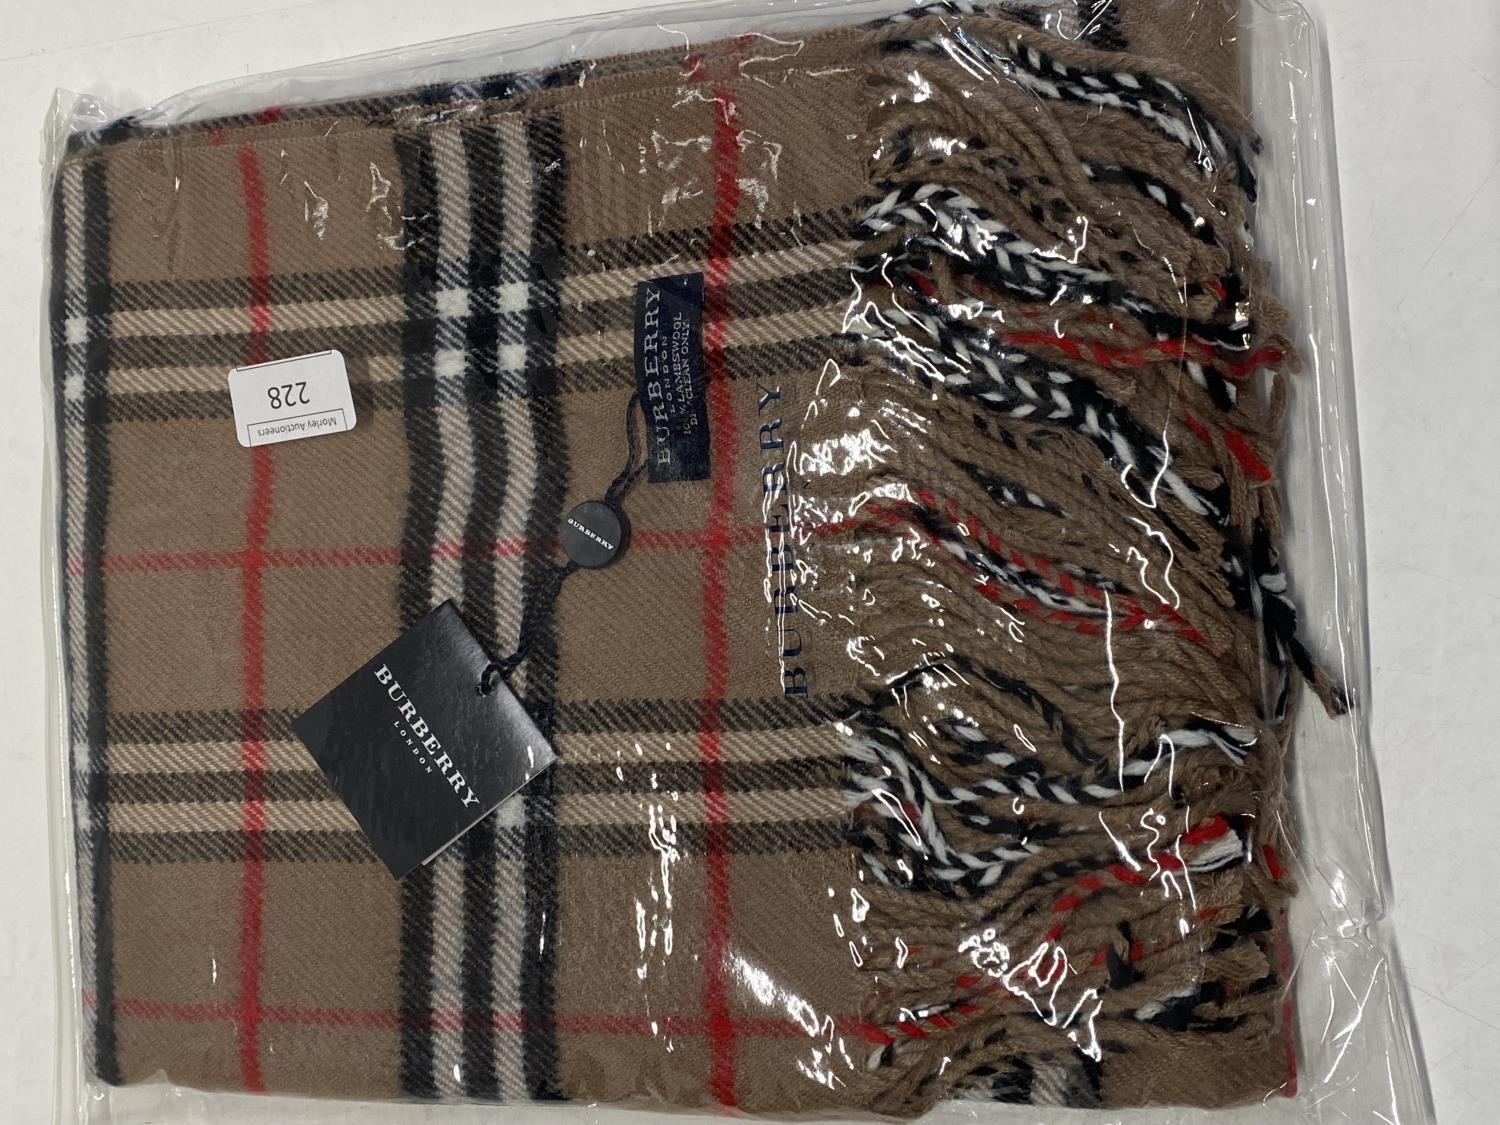 A new with tags Burberry 100% lambs wool tan shawl 206 x 70cm